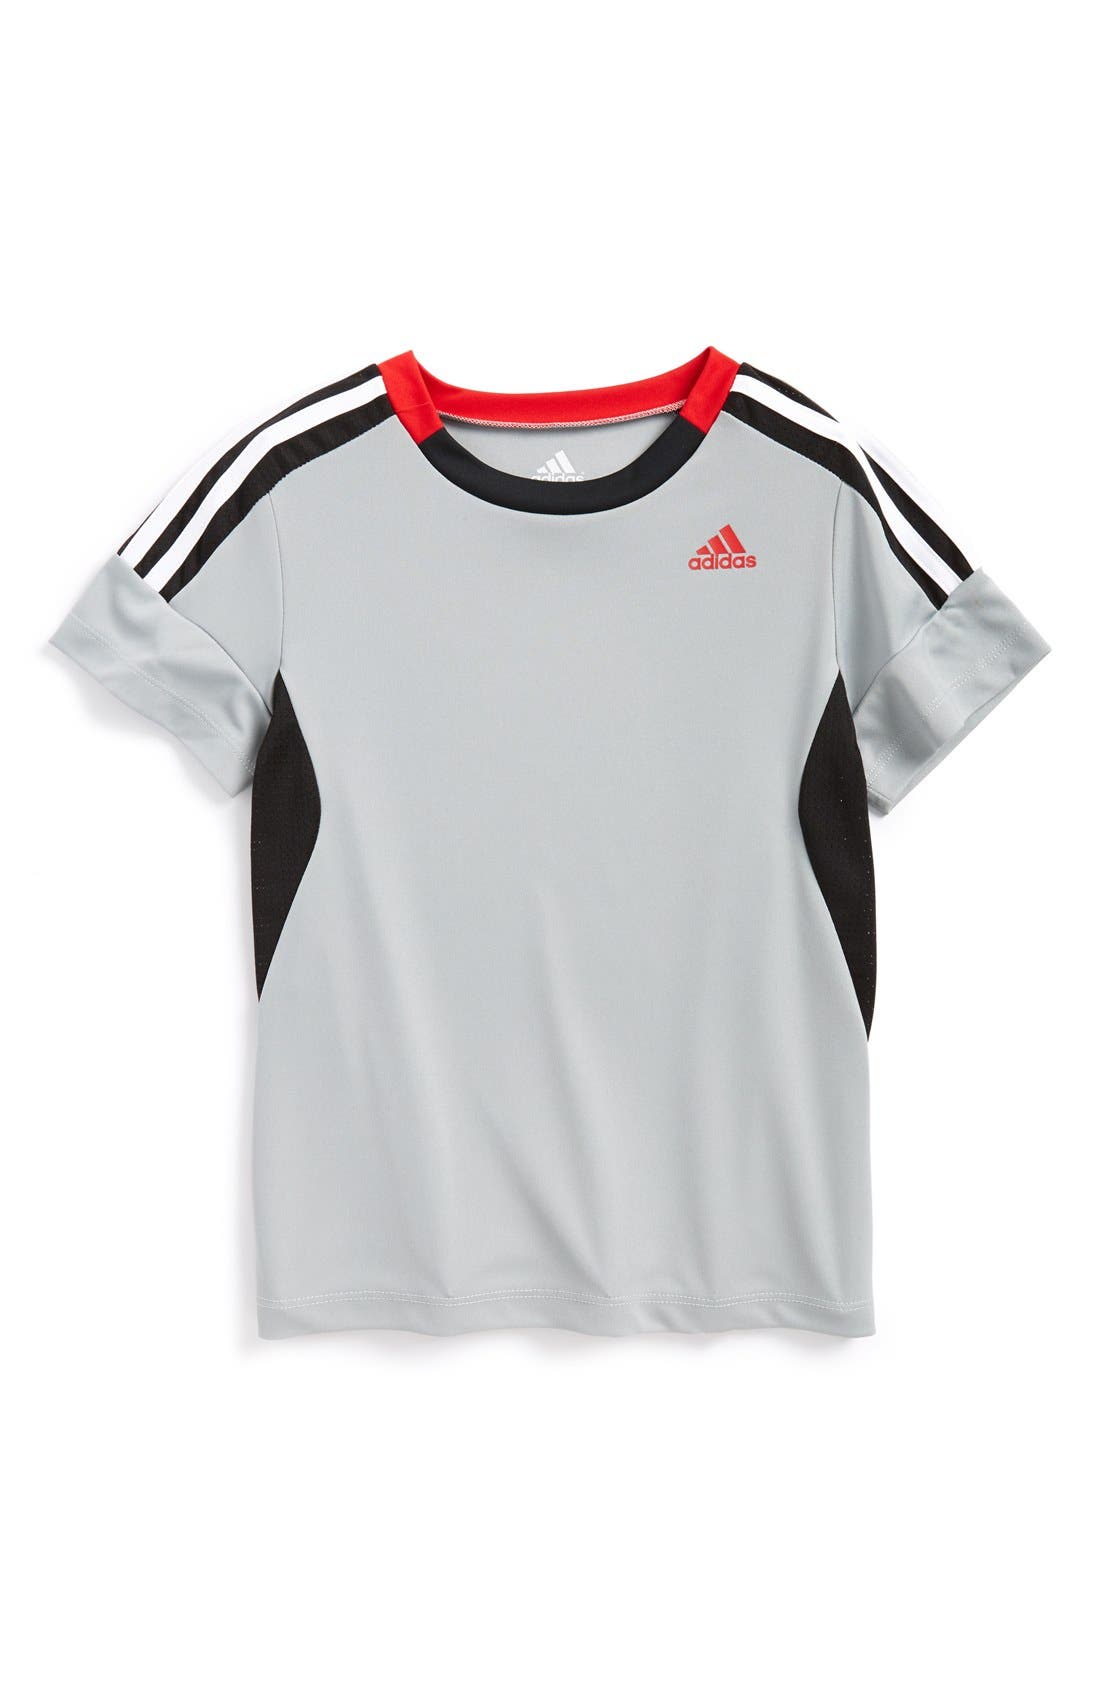 t shirt adidas climacool homme